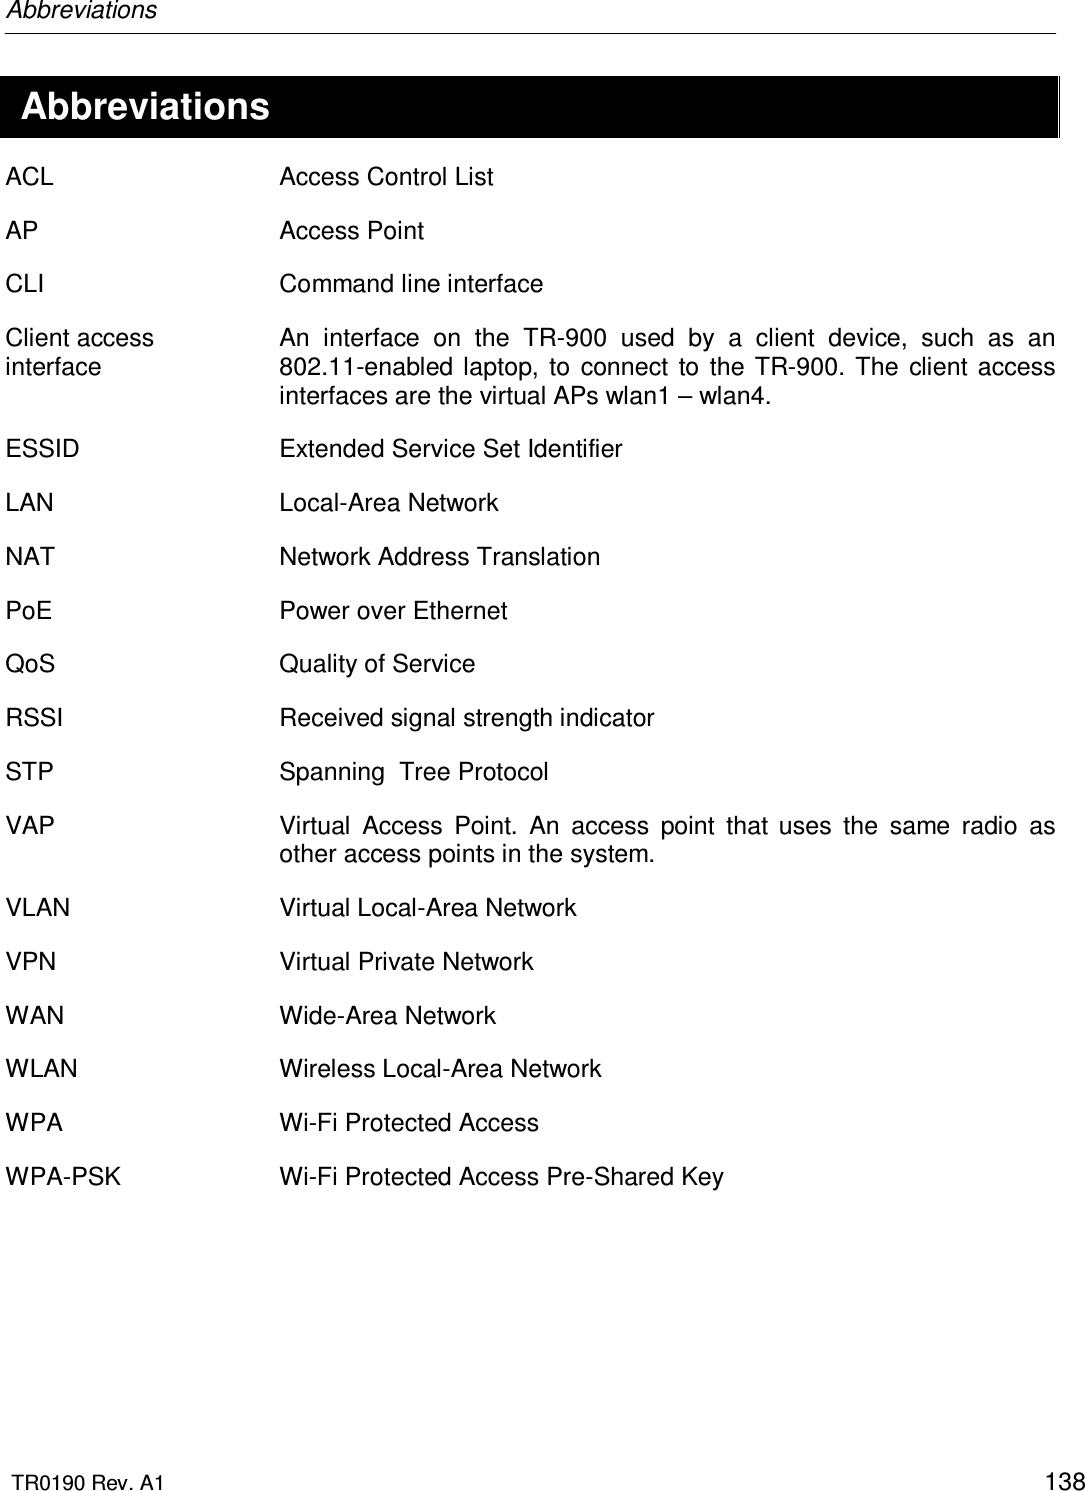 Abbreviations  TR0190 Rev. A1    138  Abbreviations ACL  Access Control List AP  Access Point CLI  Command line interface Client access interface An  interface  on  the  TR-900  used  by  a  client  device,  such  as  an 802.11-enabled  laptop,  to  connect  to  the TR-900. The  client  access interfaces are the virtual APs wlan1 – wlan4. ESSID  Extended Service Set Identifier LAN  Local-Area Network NAT  Network Address Translation PoE  Power over Ethernet QoS  Quality of Service RSSI  Received signal strength indicator STP  Spanning  Tree Protocol VAP  Virtual  Access  Point.  An  access  point  that  uses  the  same  radio  as other access points in the system. VLAN  Virtual Local-Area Network VPN  Virtual Private Network WAN  Wide-Area Network WLAN  Wireless Local-Area Network WPA  Wi-Fi Protected Access WPA-PSK  Wi-Fi Protected Access Pre-Shared Key   